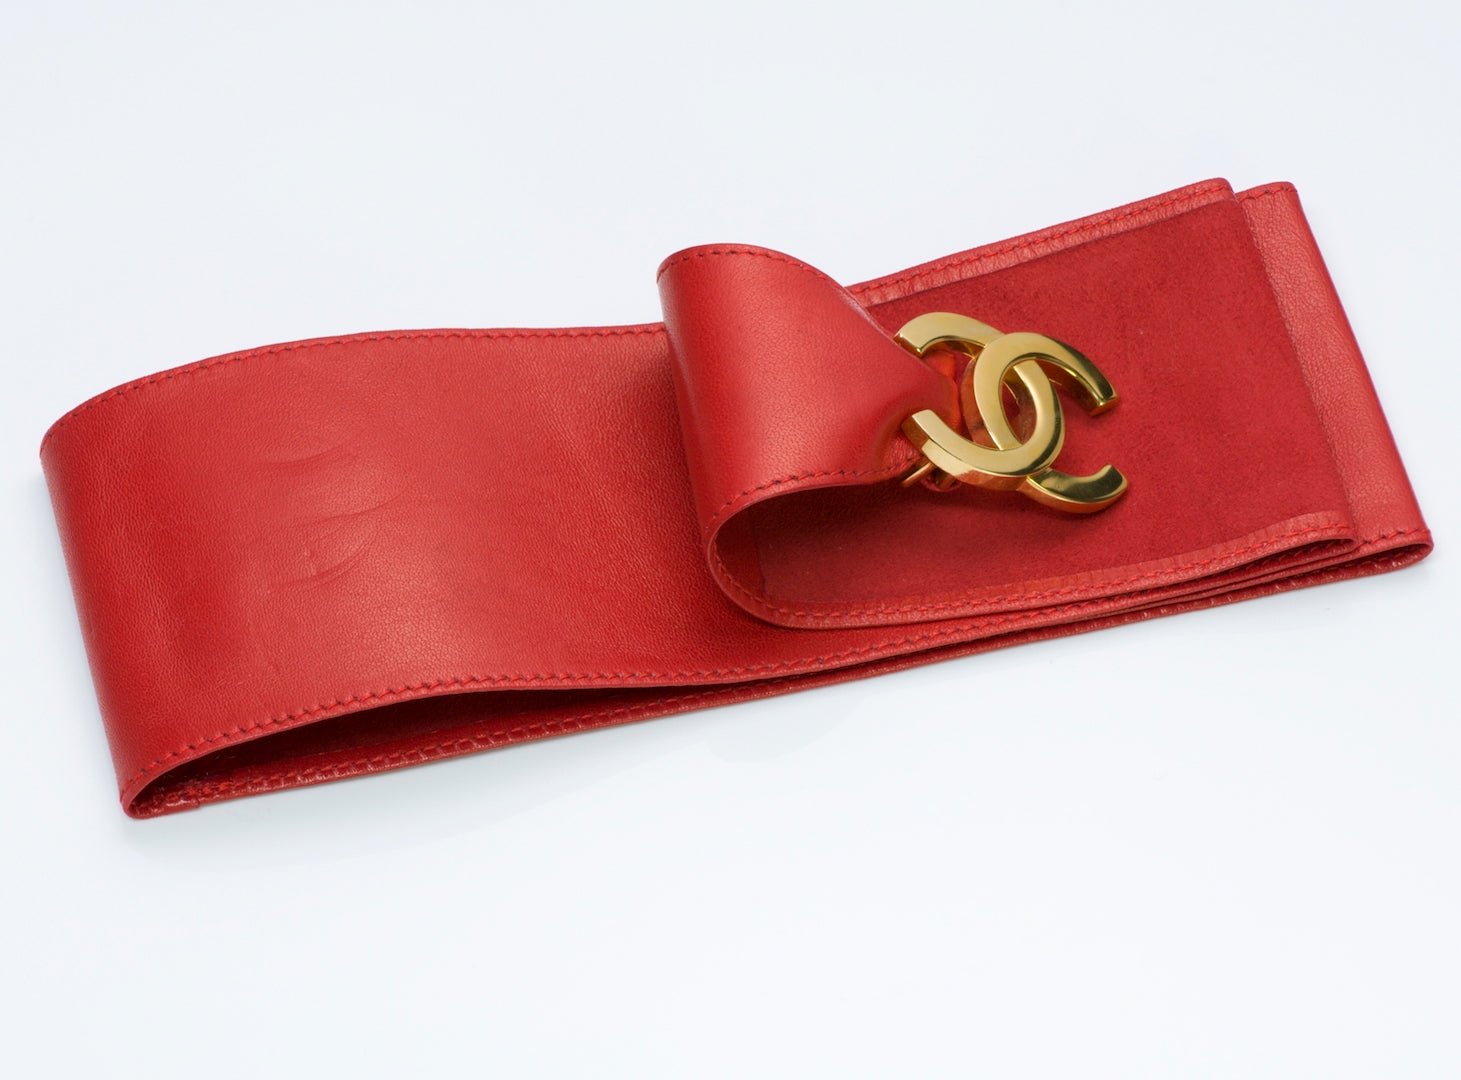 Chanel Red Leather Belt